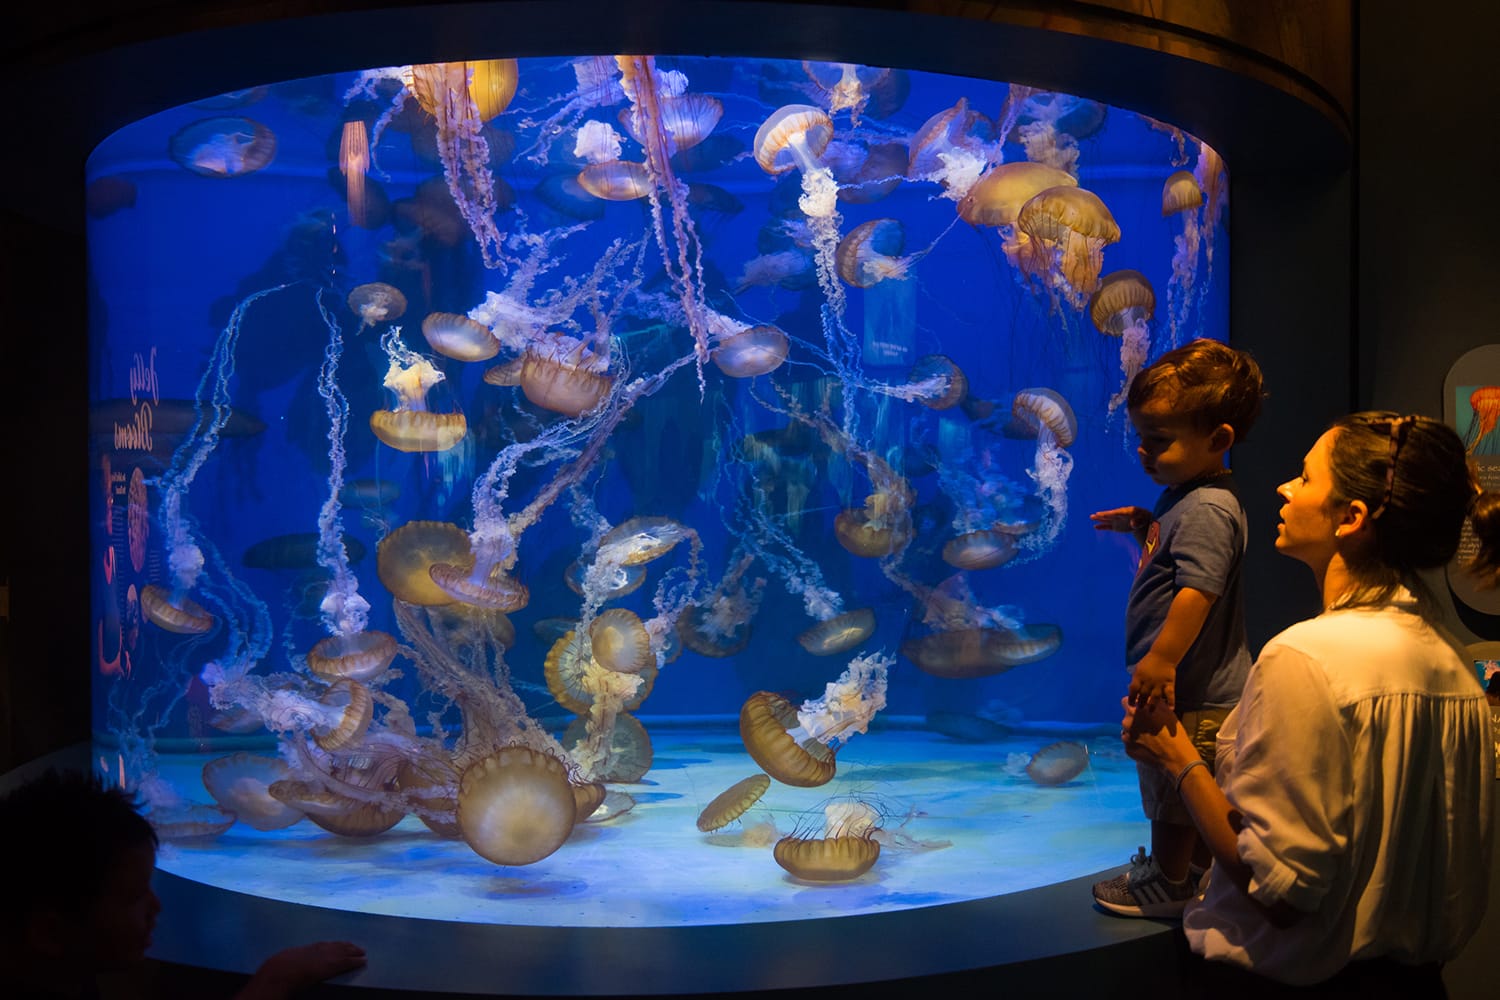 The visitors looking at the Aquarium full of jelly fishes in Long Beach, CA